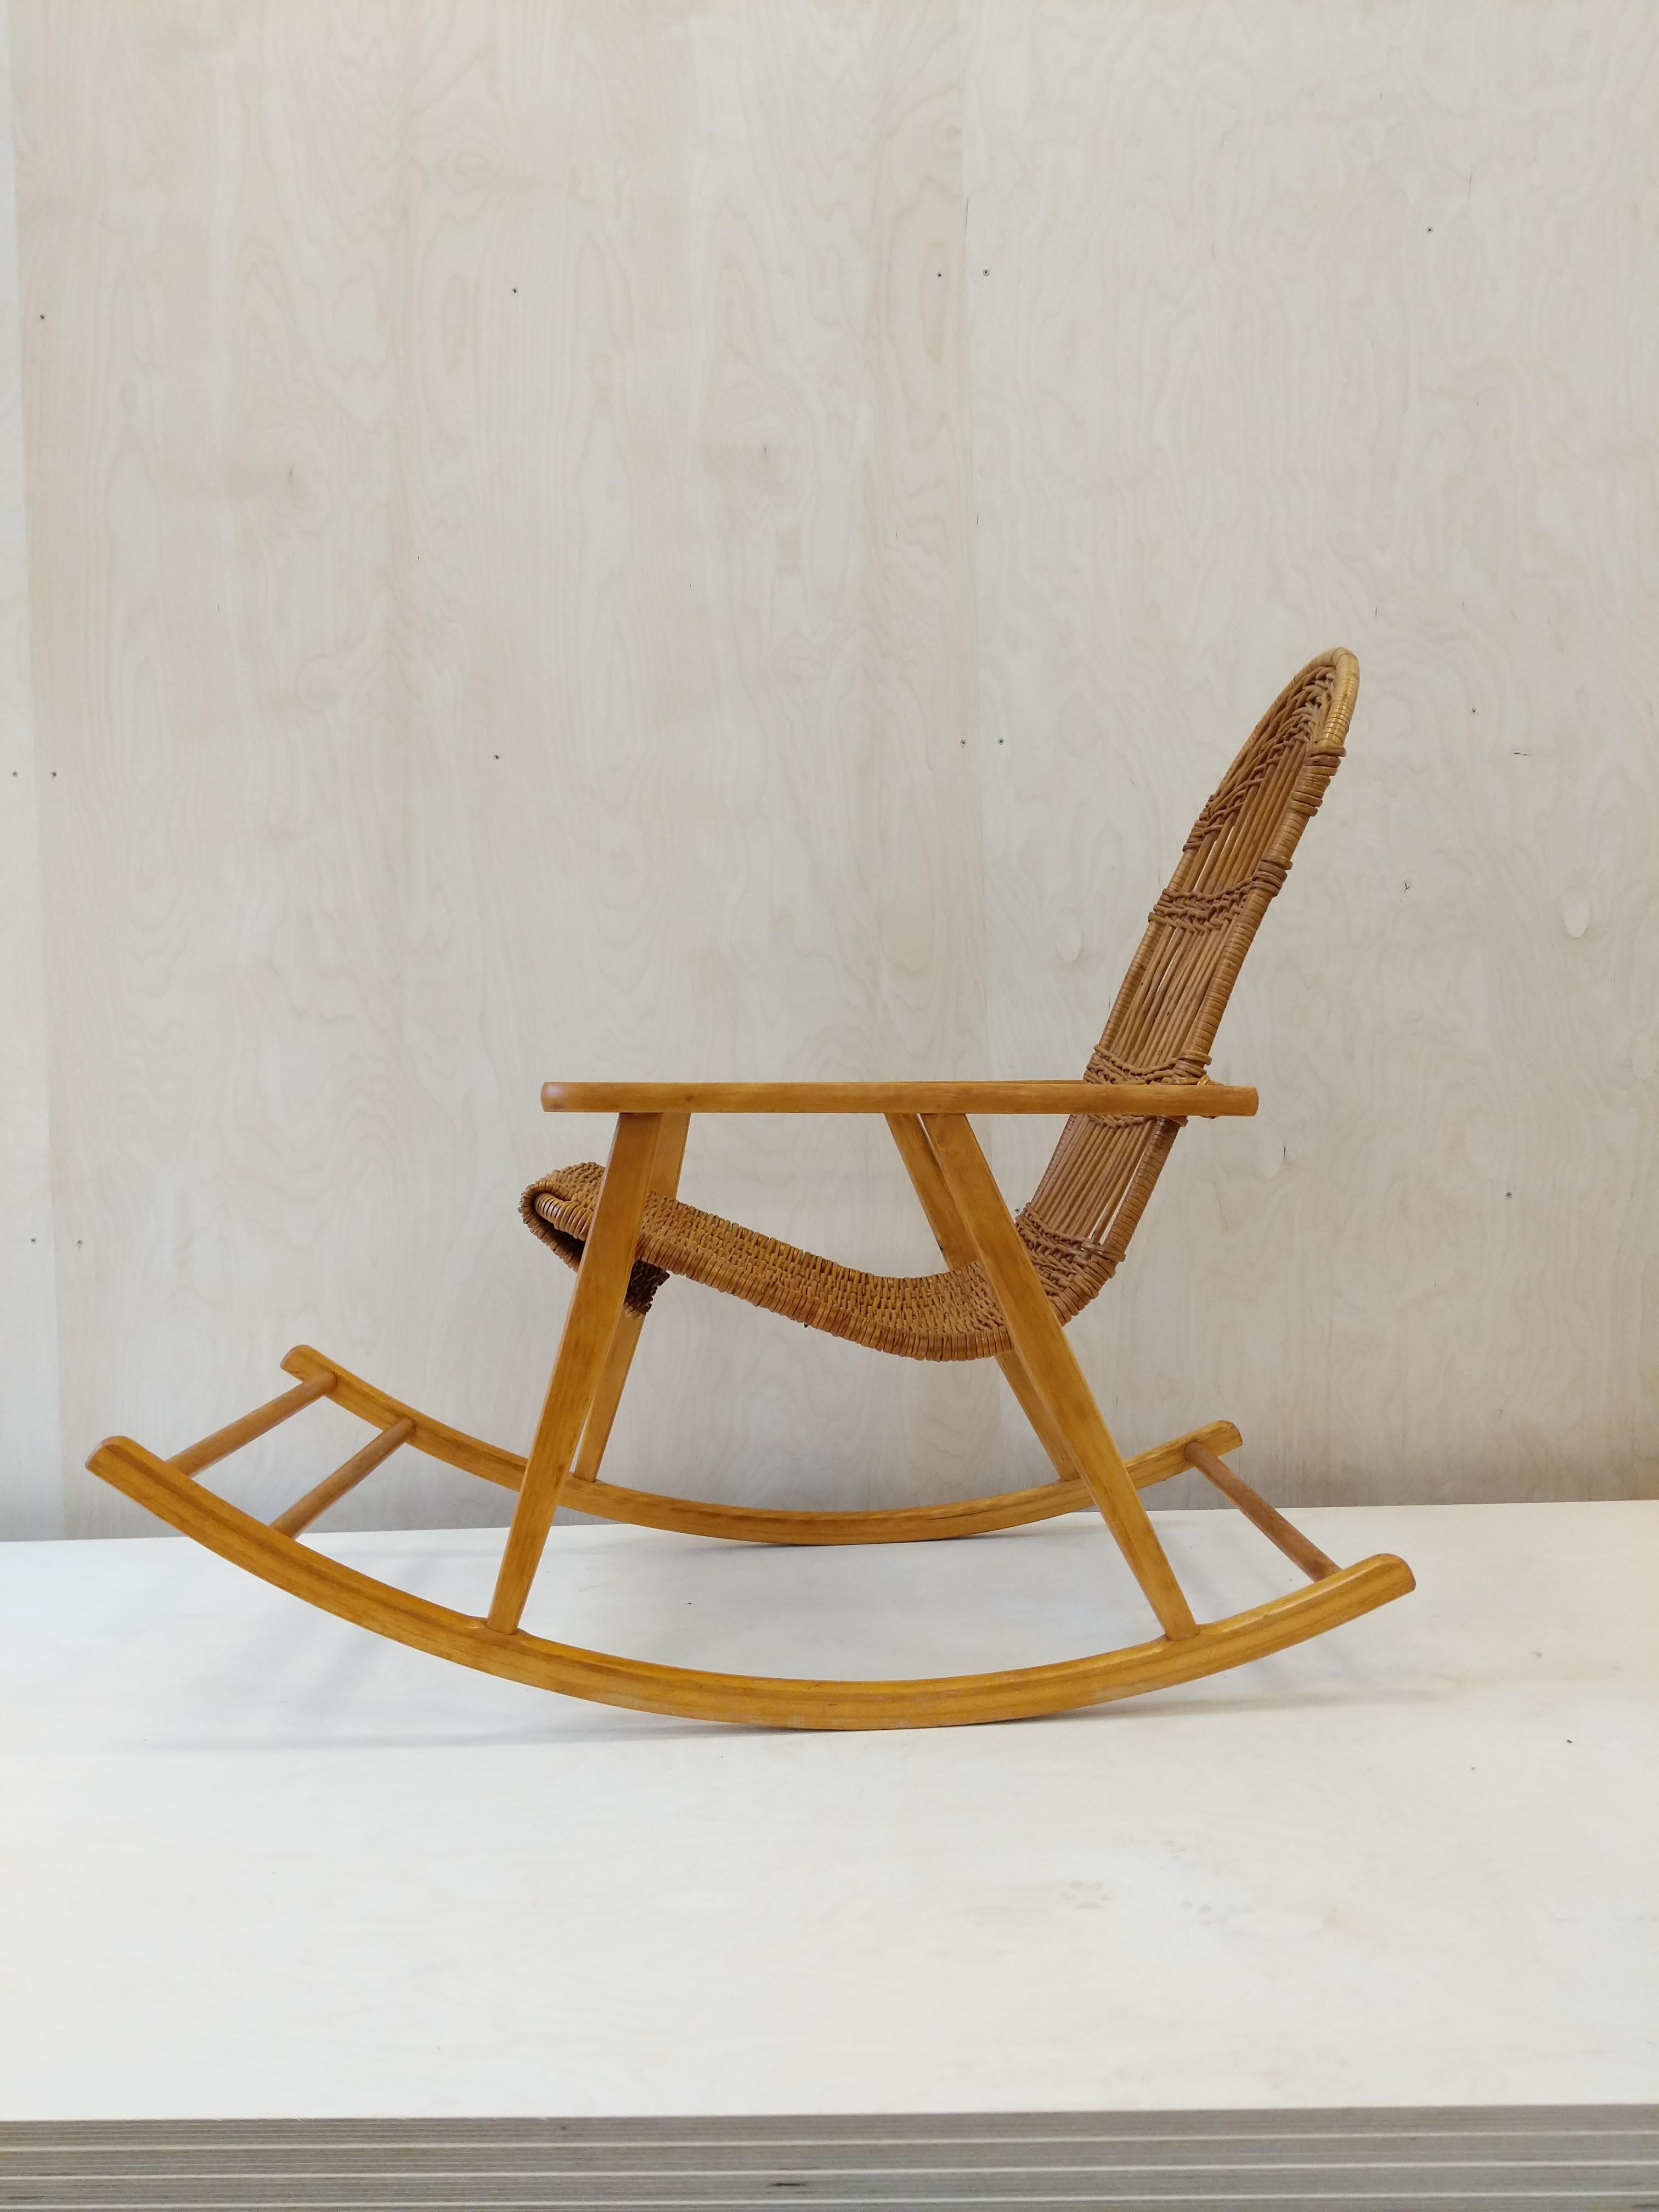 Authentic vintage Czech mid century modern rocking chair.

This chair is in excellent vintage condition with very few signs of age-related wear (see photos).

If you would like any additional details, please contact us.

Dimensions:
37.5” tall to